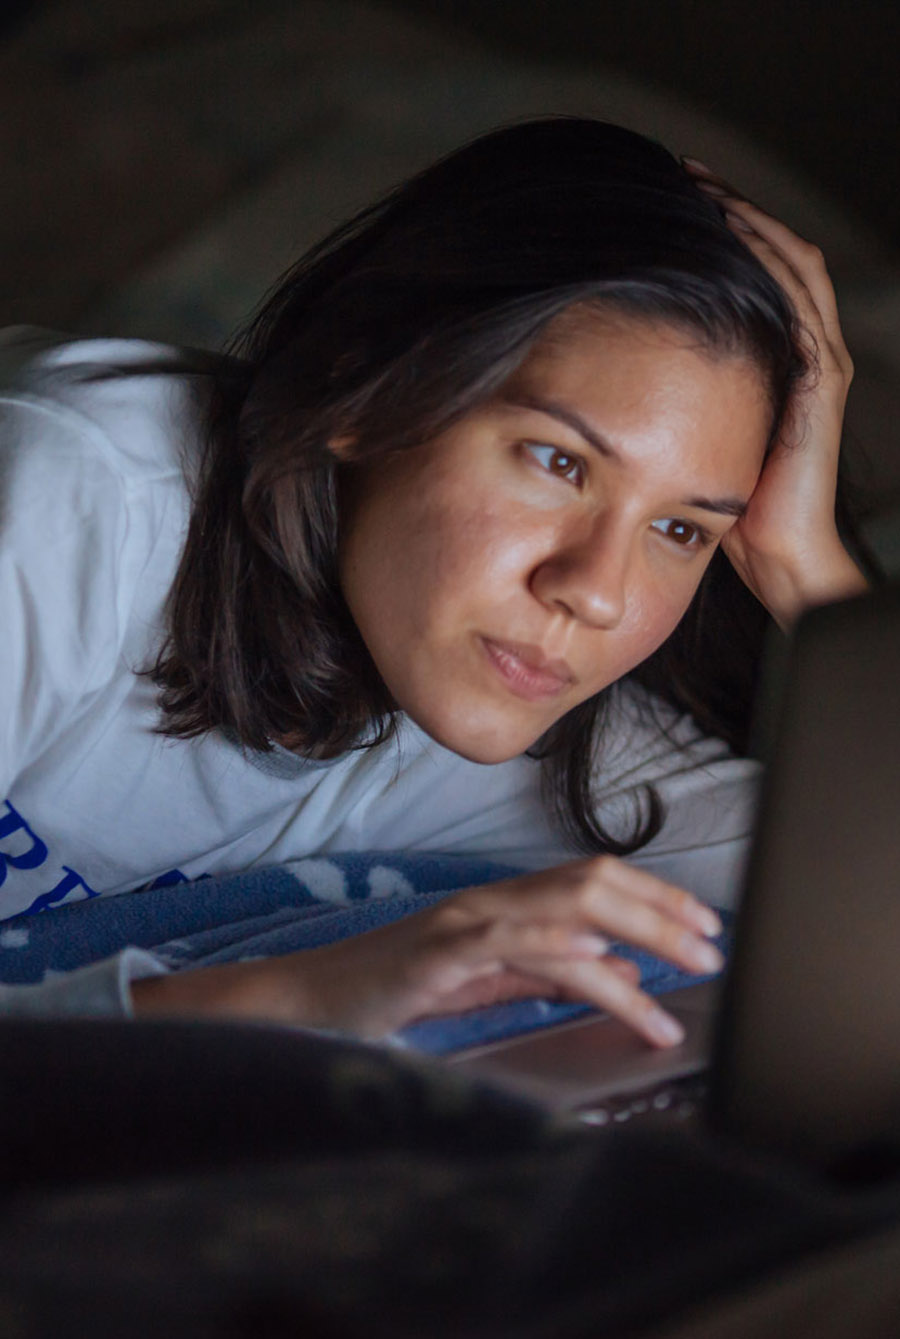 Person leaning on their elbow and using a laptop in bed in a dark room